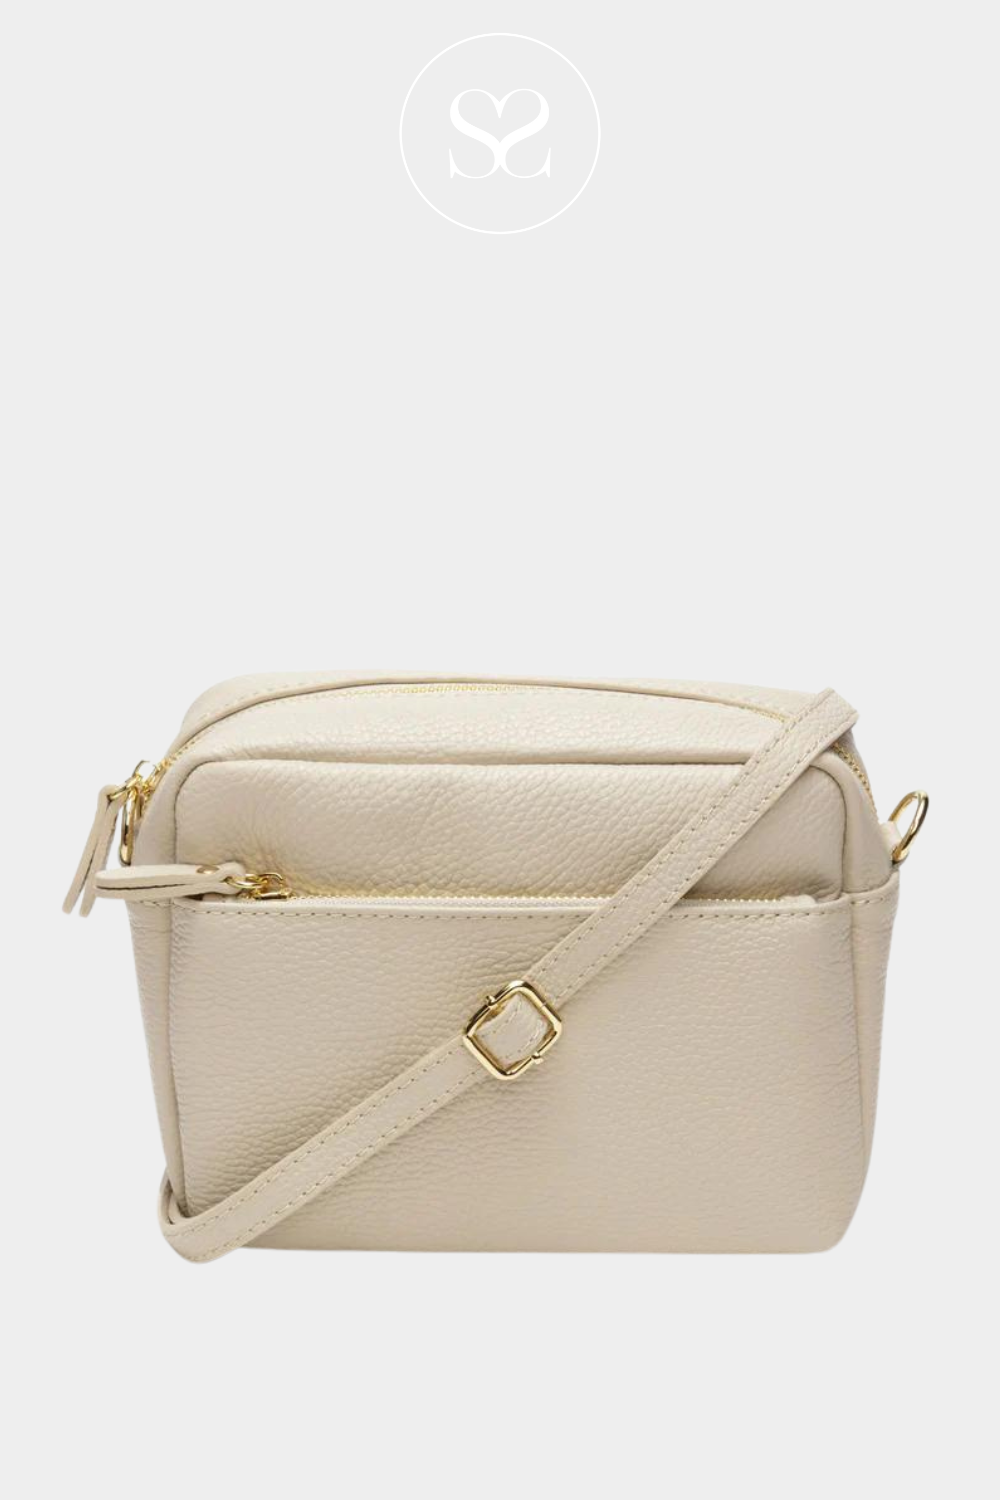 elie beaumont stone leather crossbody bag - town style